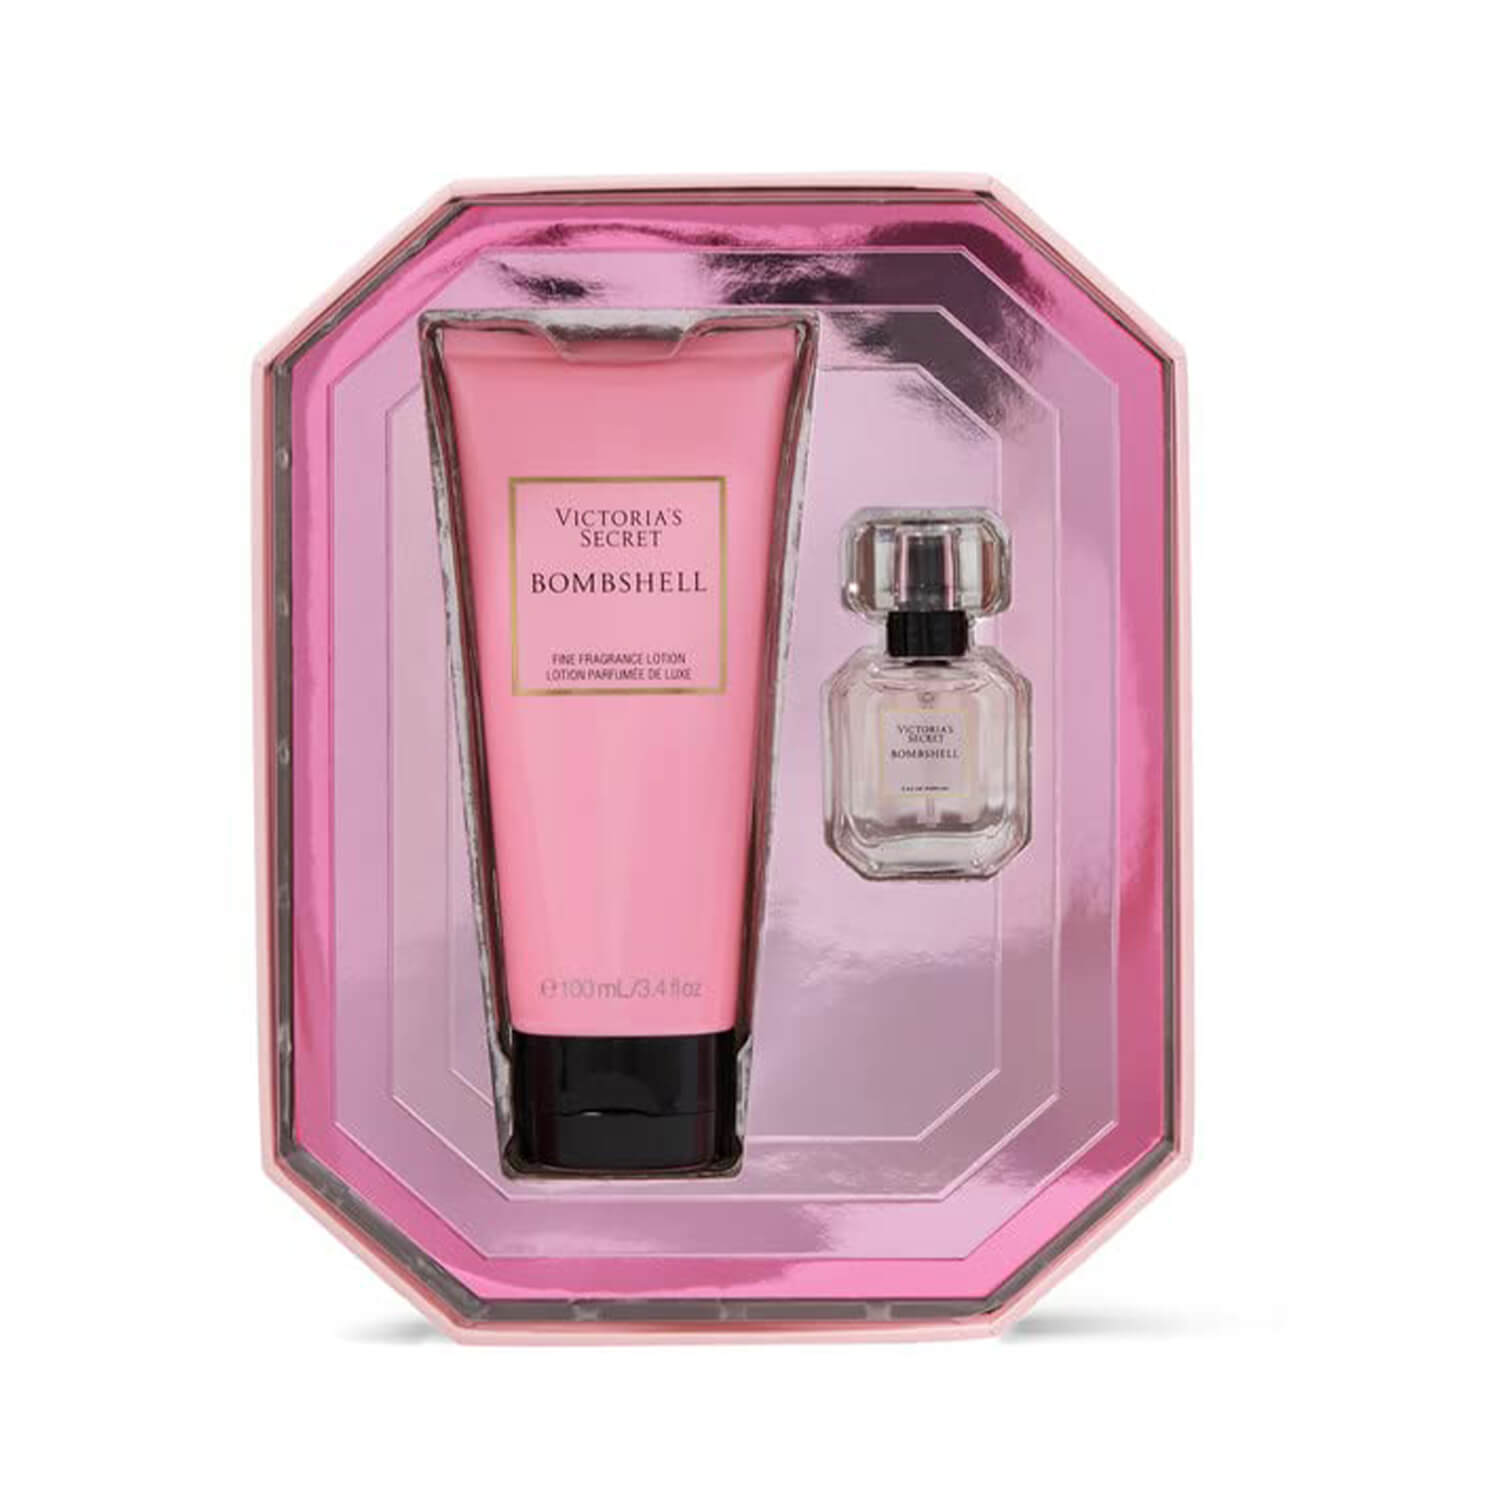 Shop 100% original Victoria's Secret Bombshell perfume and lotion duo gift set available at Heygirl.pk for delivery in Pakistan